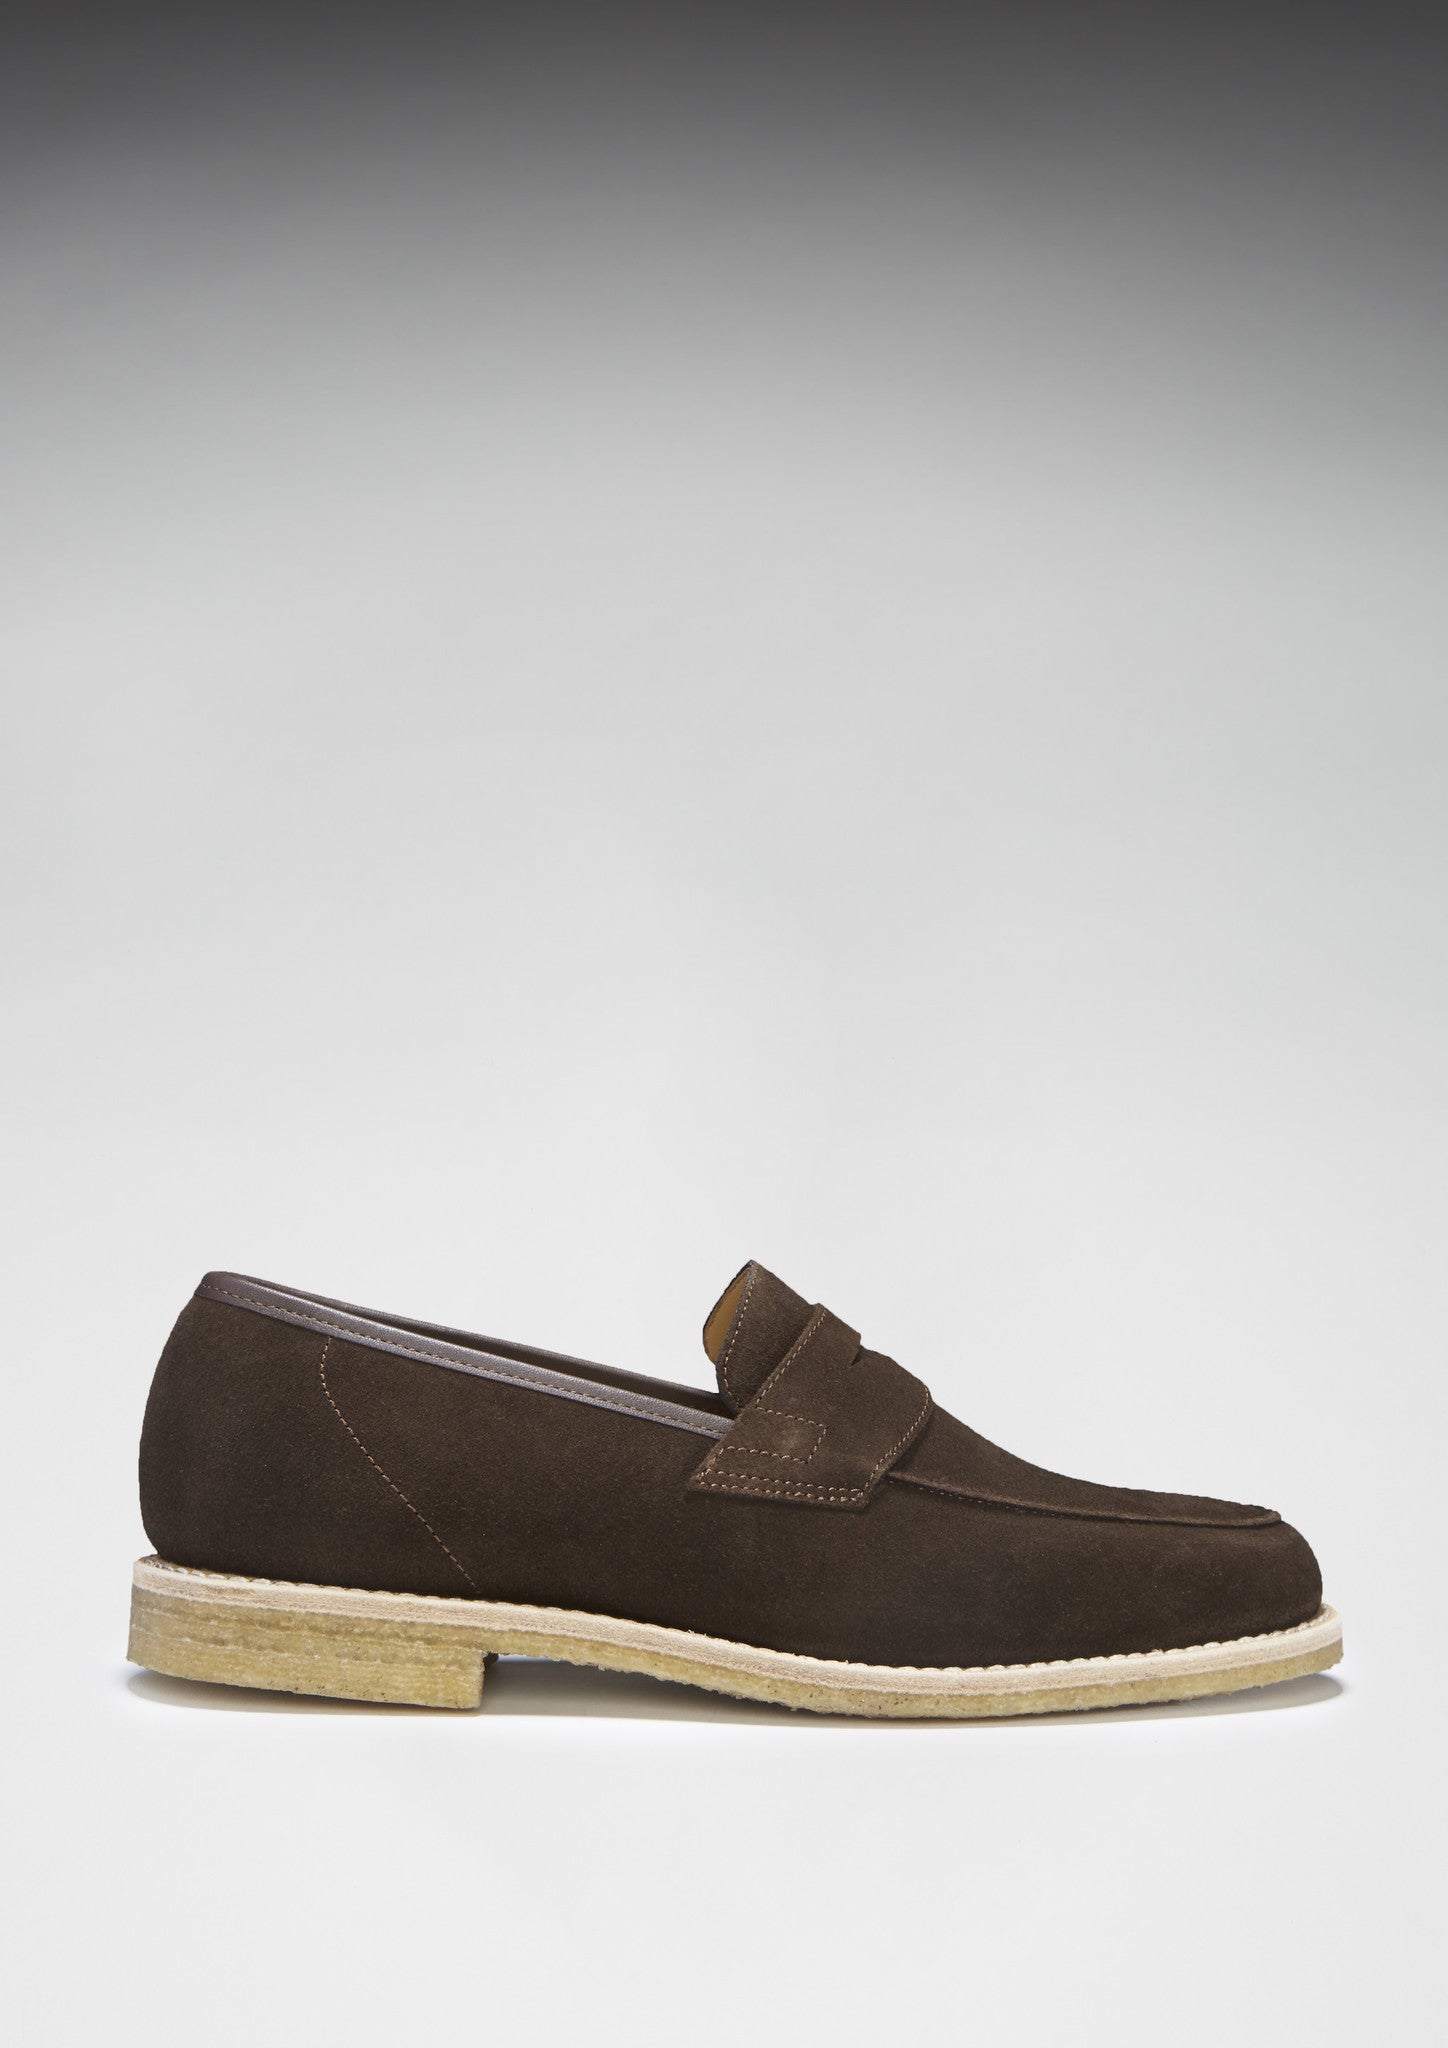  Brown Suede Goodyear Welted Loafers with Crepe Sole